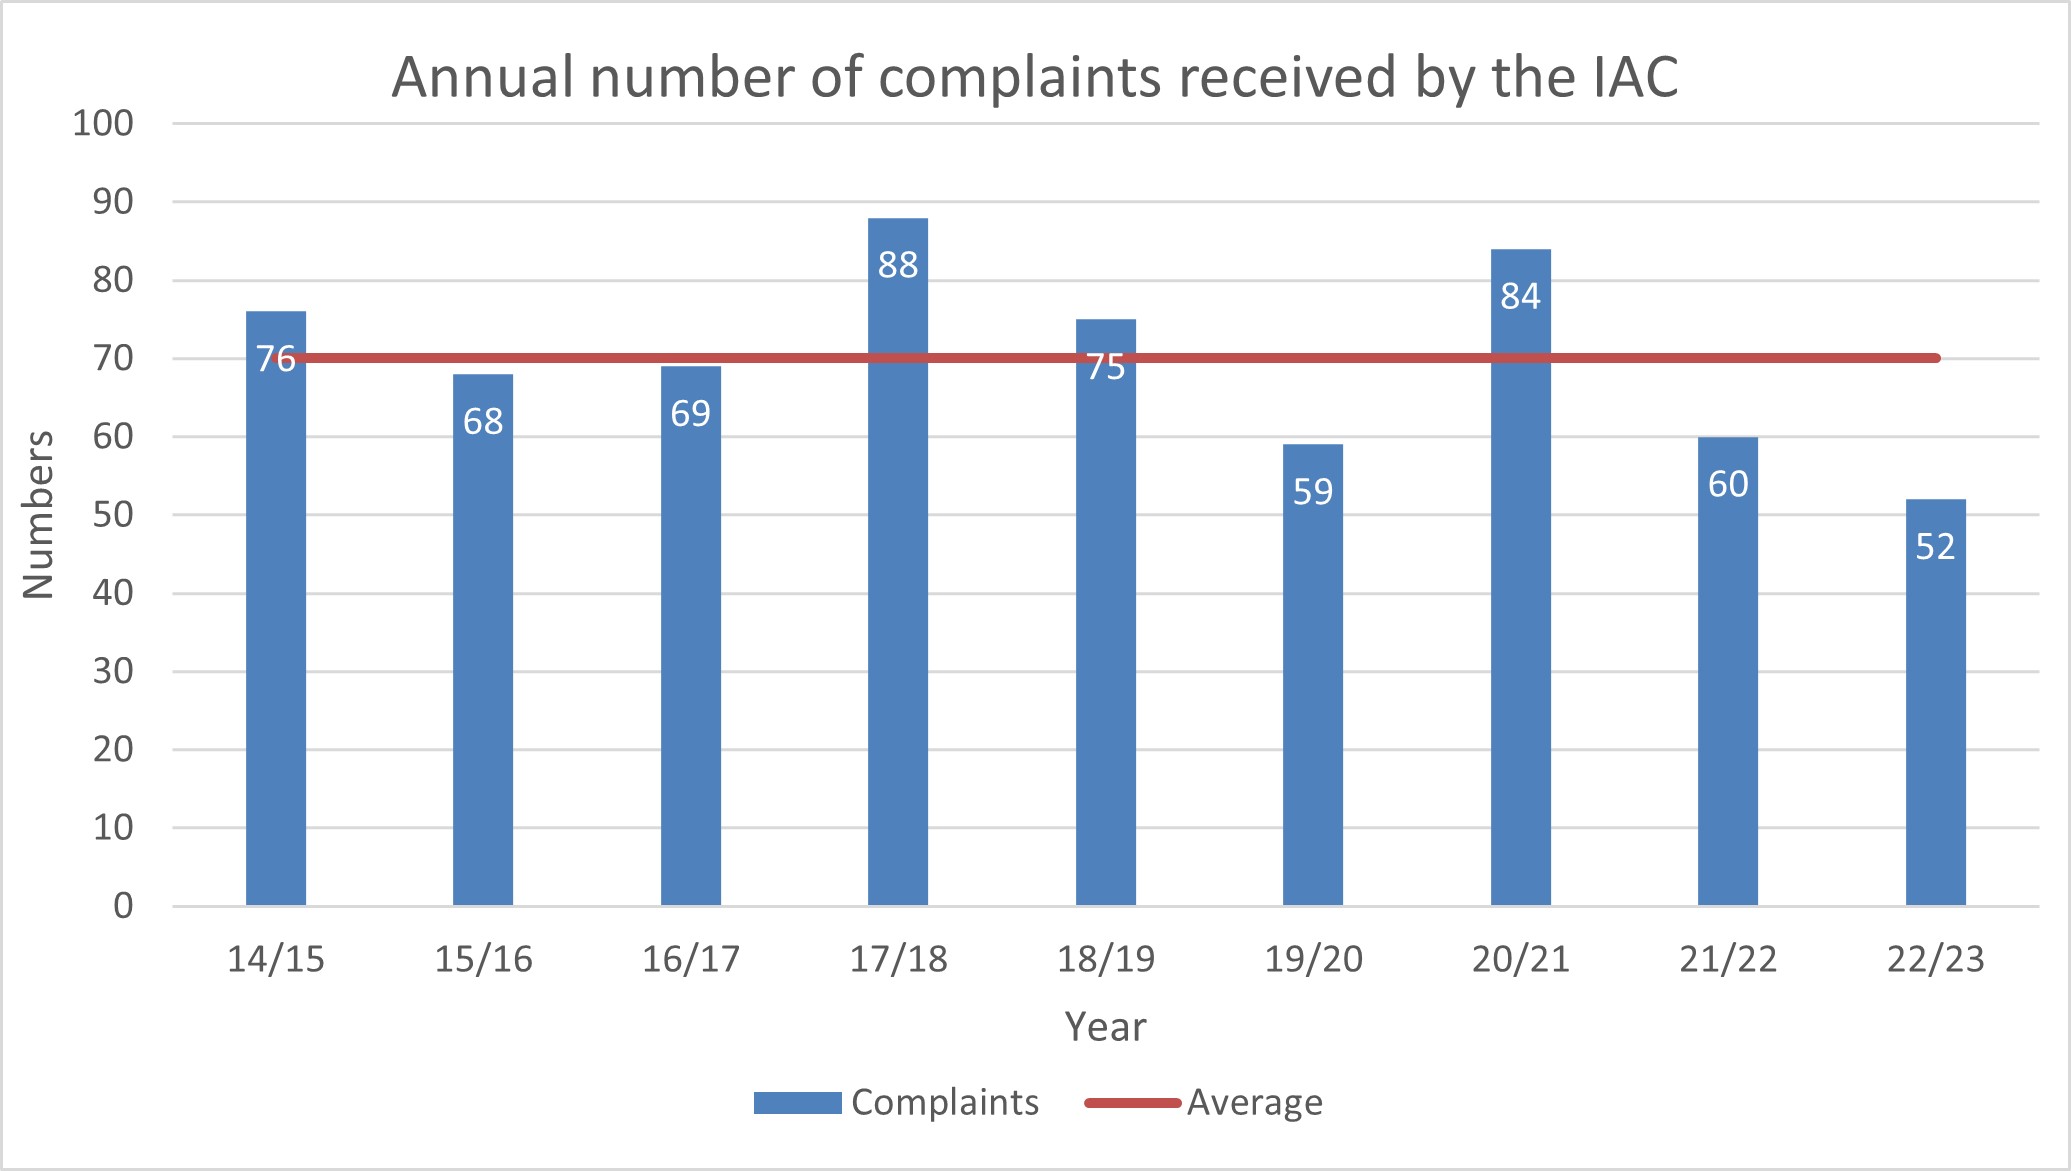 Graph showing the annual number of complaints received by the IAC from 2014/15 to 2022/23. These were as follows: 2014/15: 76, 2015/16: 68, 2016/17: 69, 2017/18: 88, 2018/19: 75, 2019/20: 59, 2020/21: 84, 2021/22: 60, 2022/23: 52. The average annual number of complaints received by the IAC over this period was 70.1.